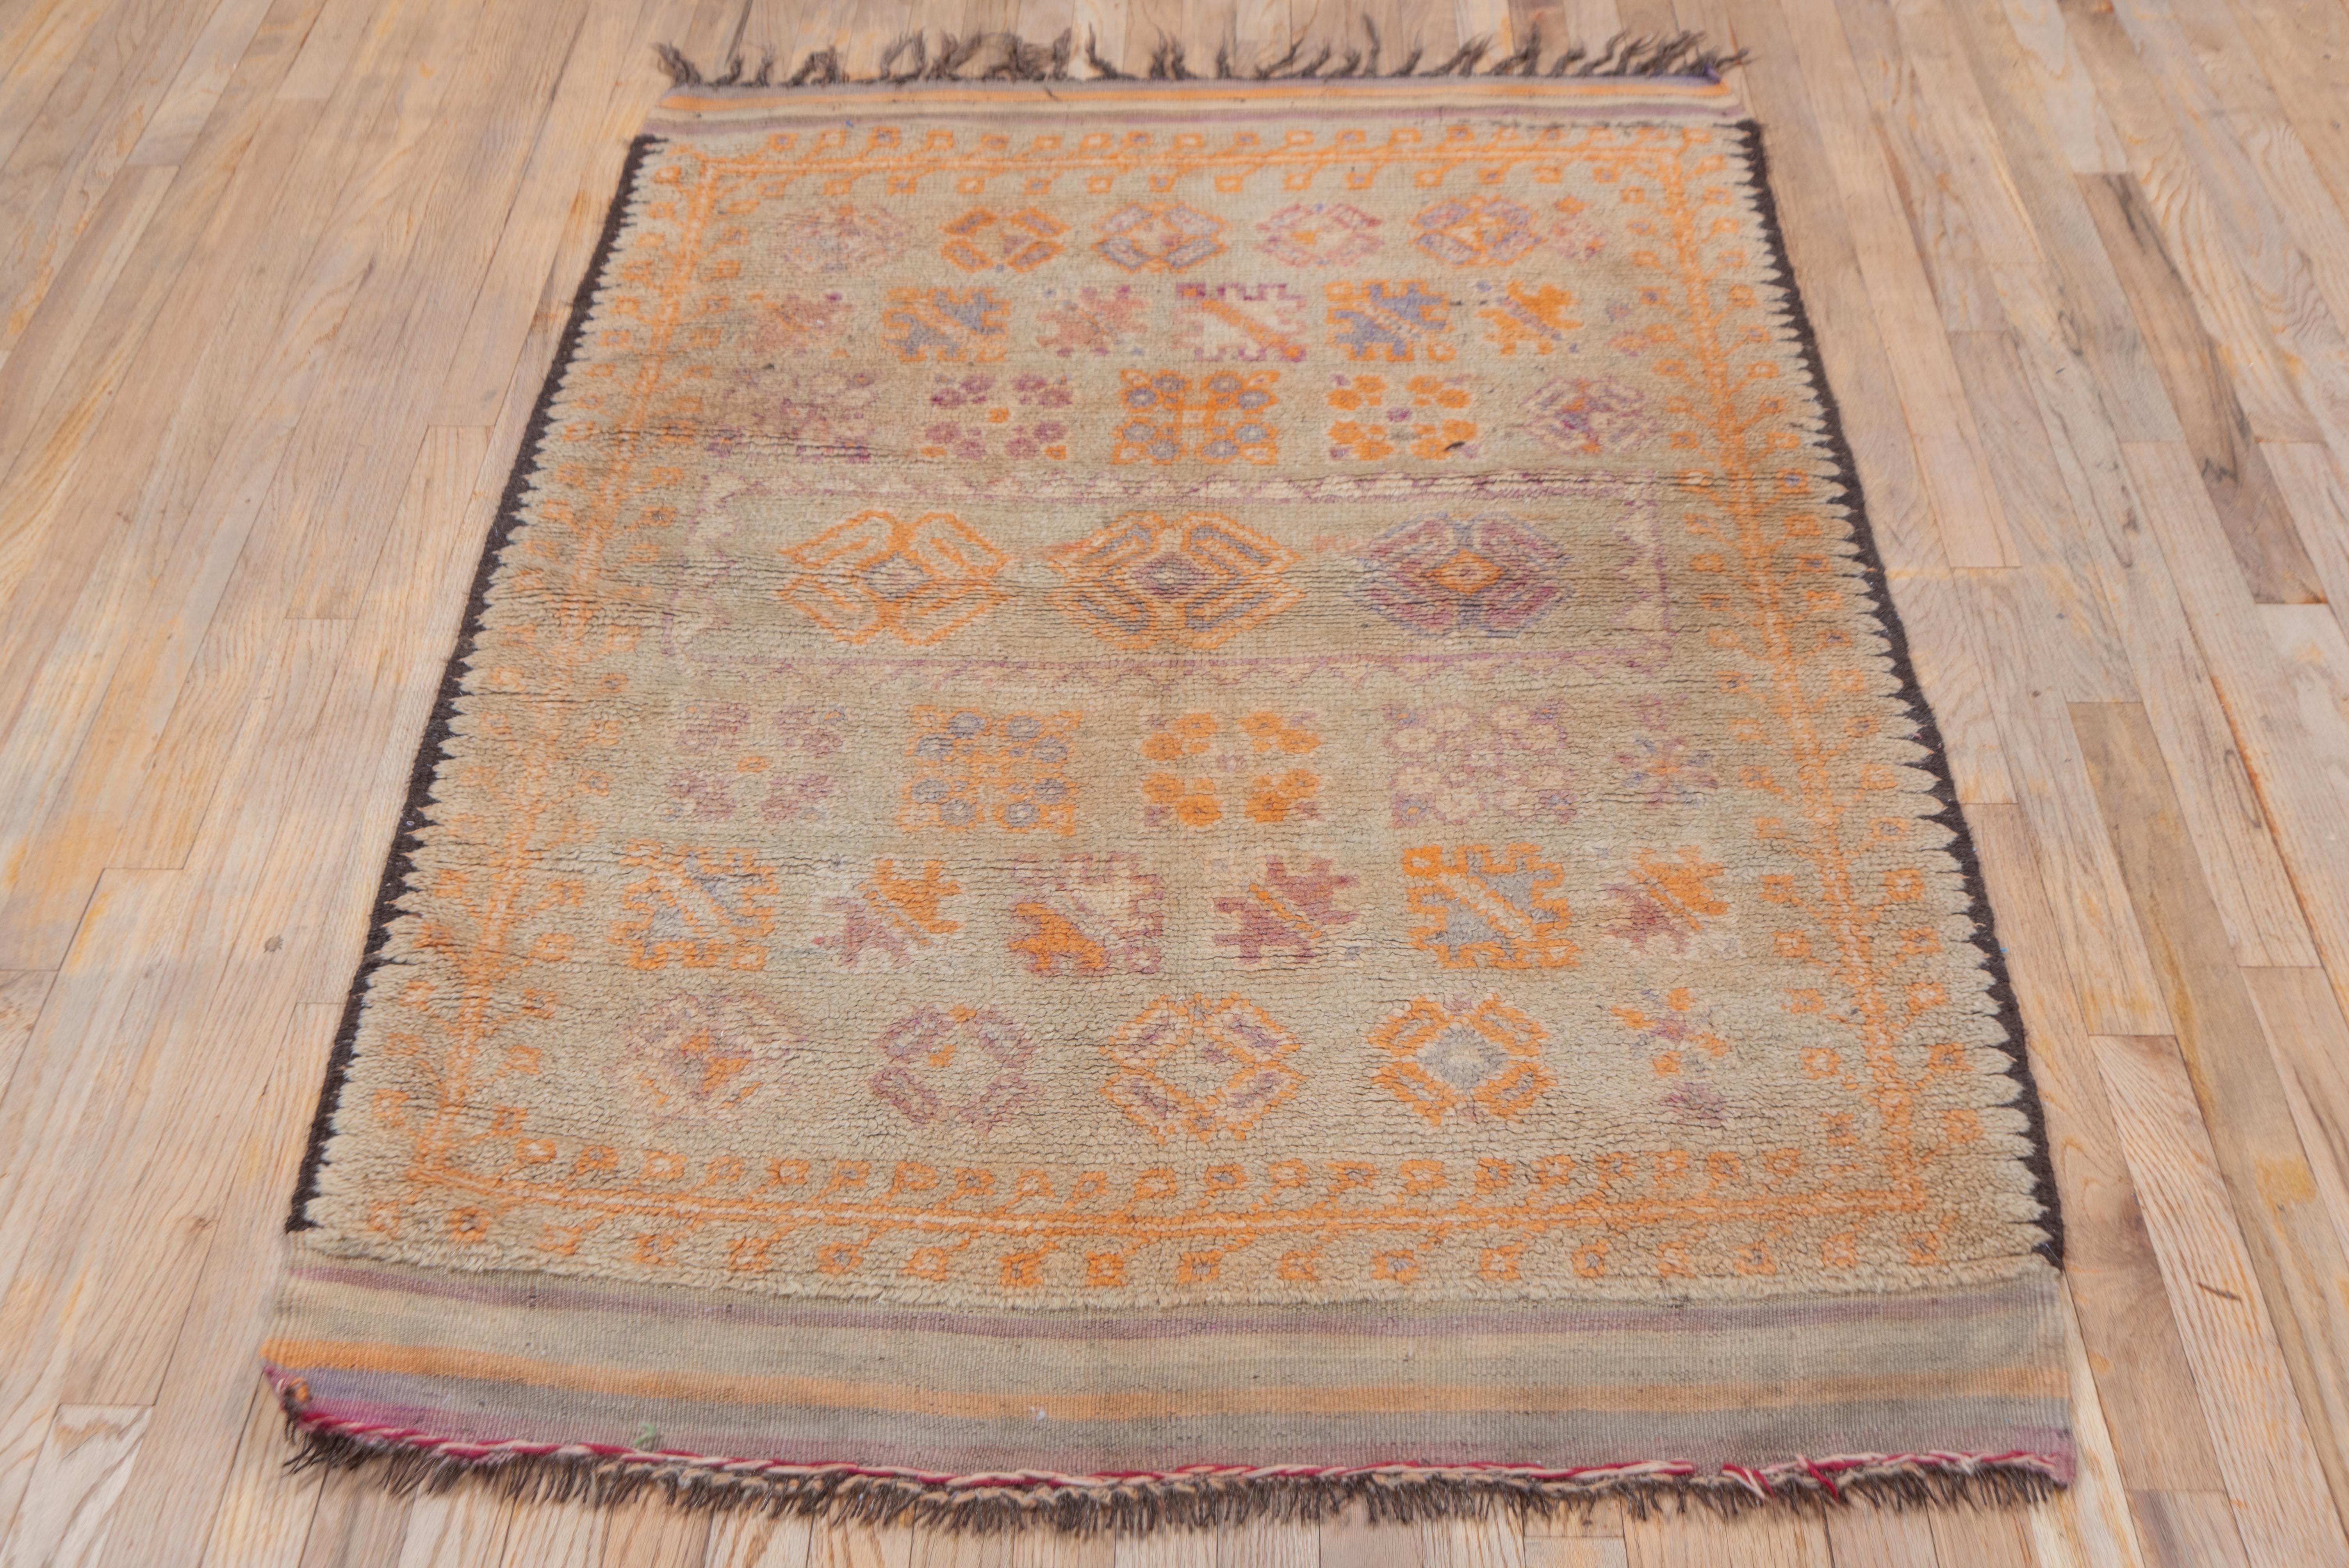 Perfect antique Moroccan rug in pinks, purples, oranges and organic lines/shapes with 16 motifs